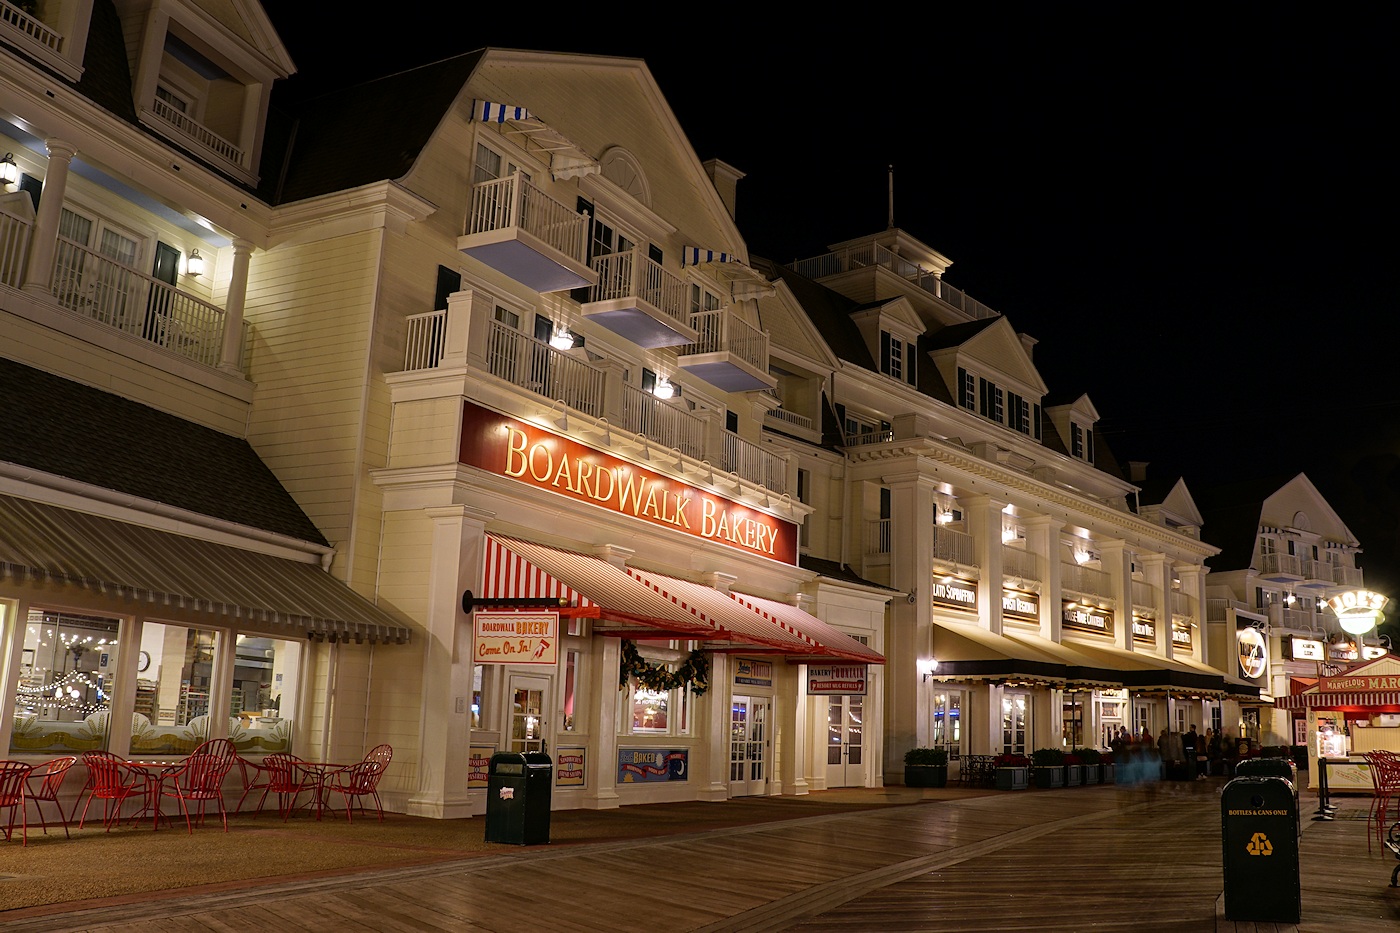 Storefronts on the Boardwalk, night